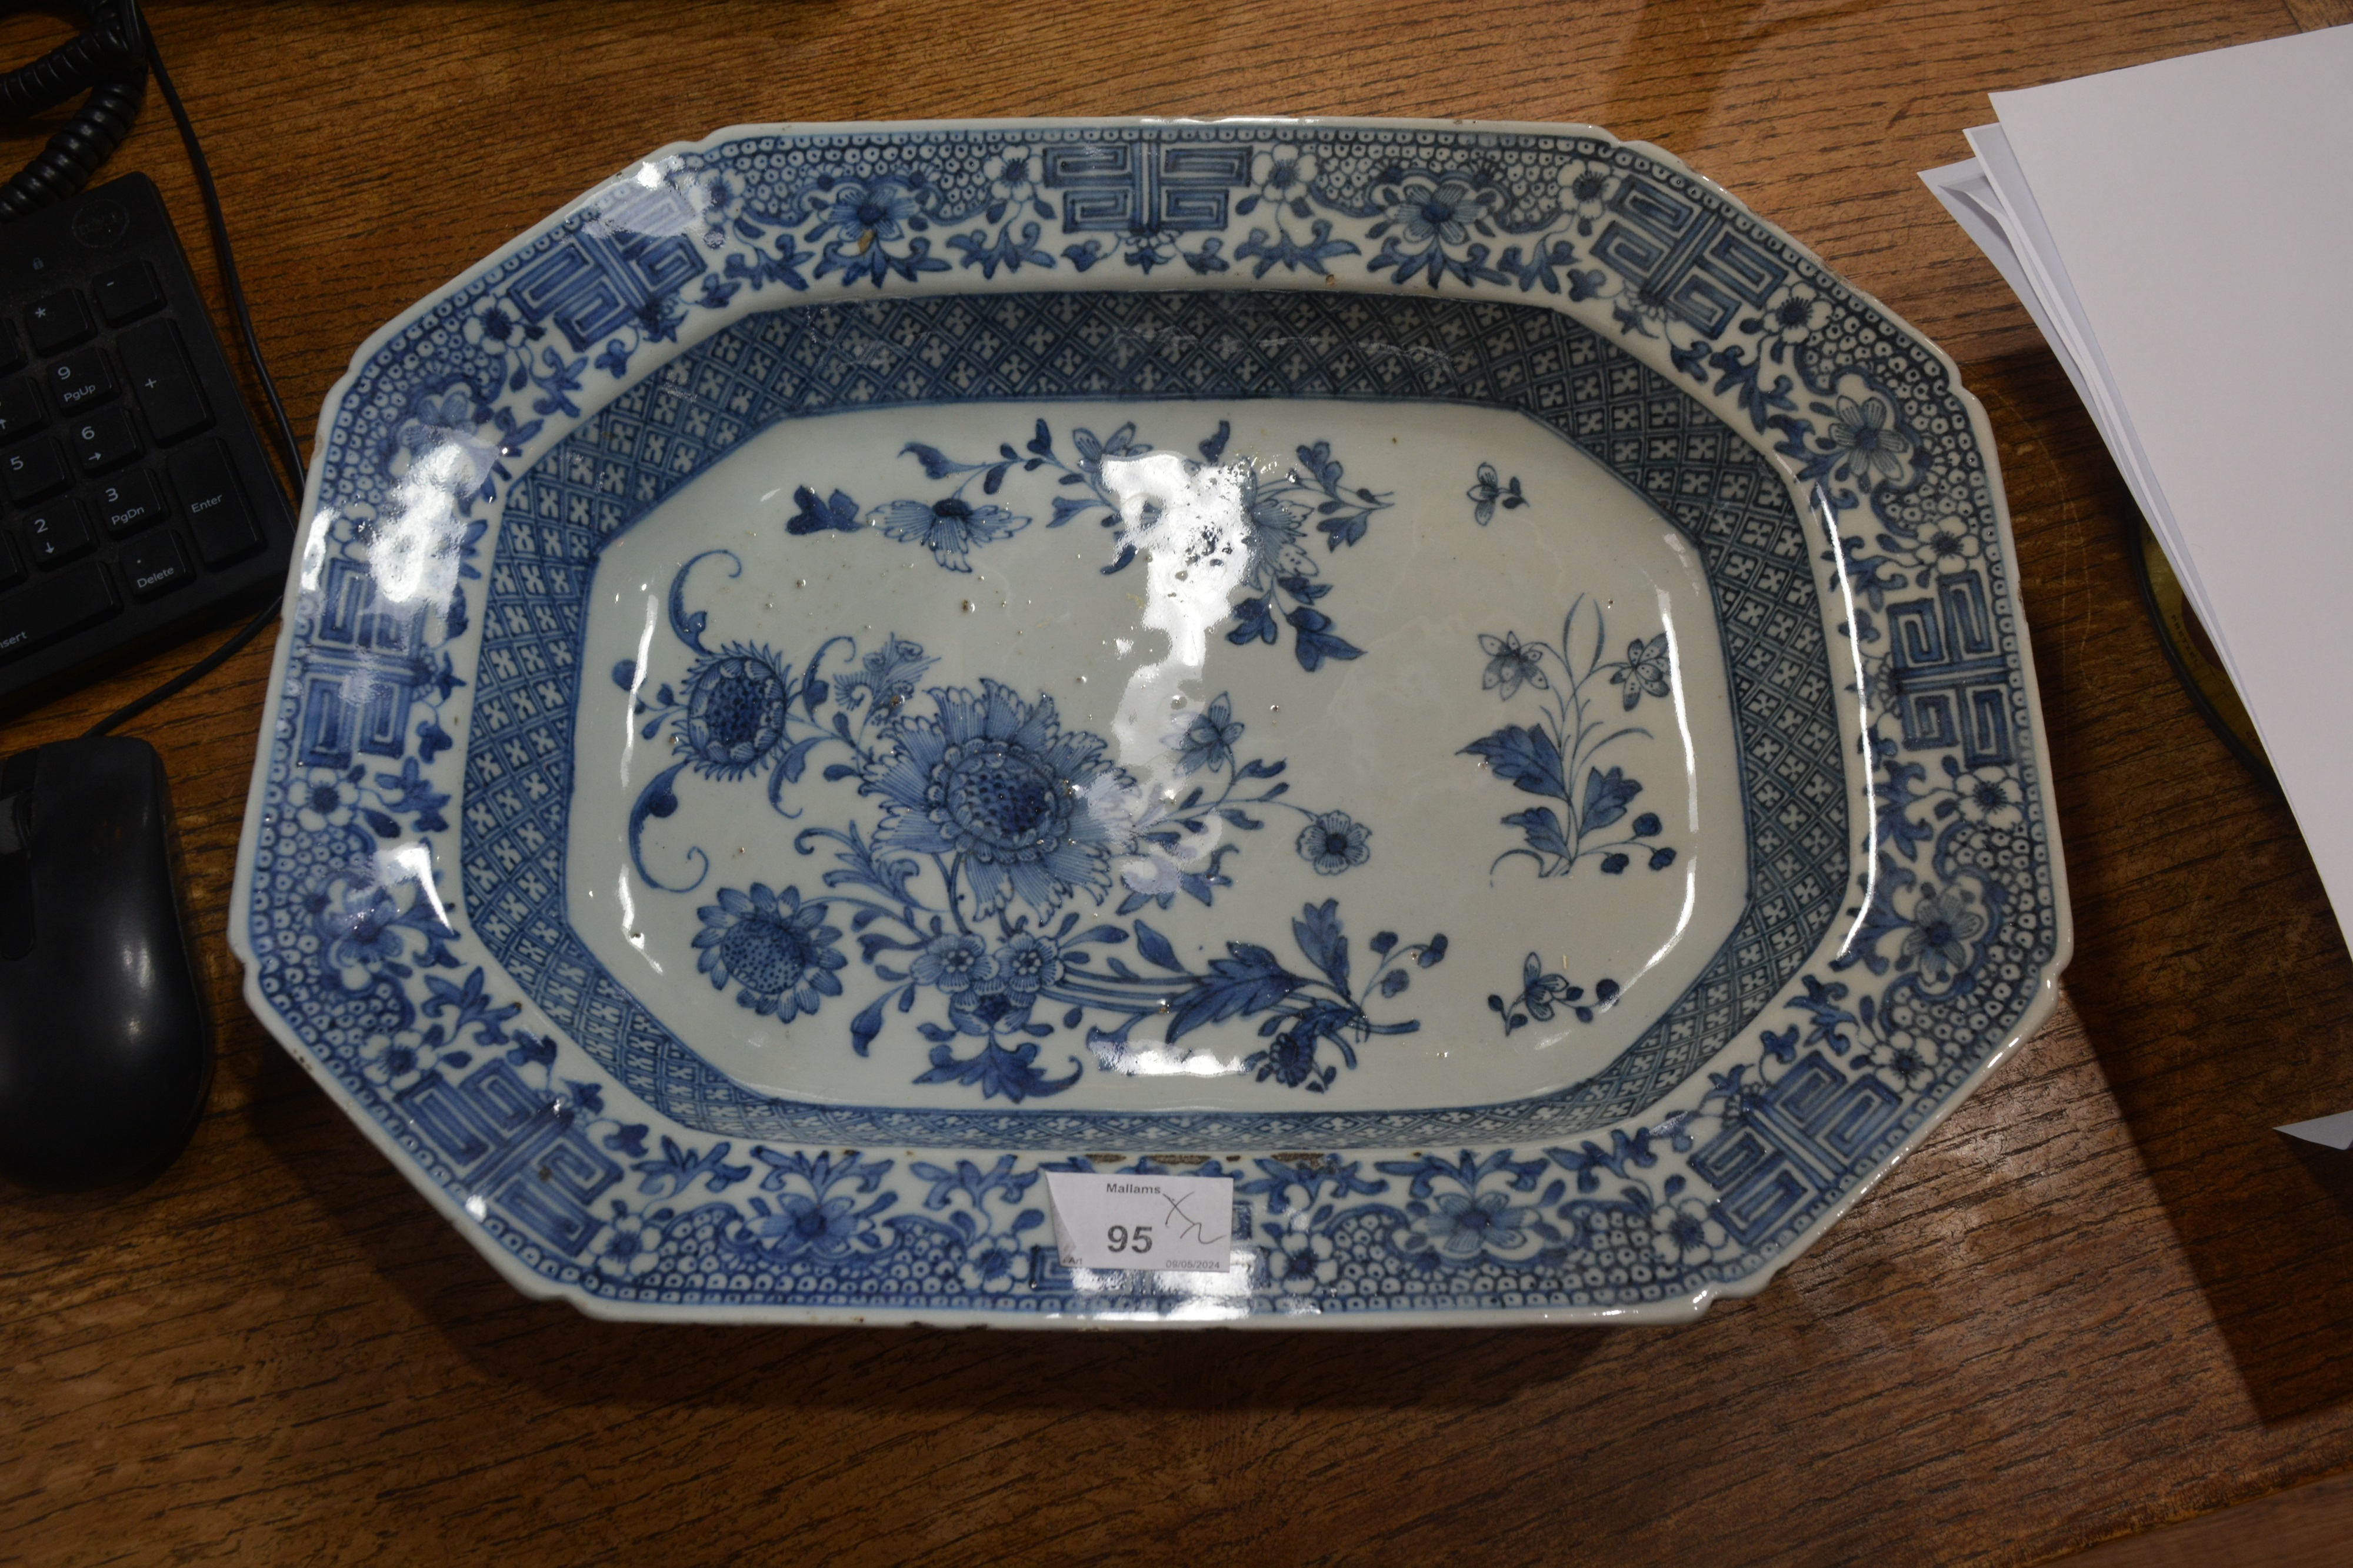 Two export blue and white porcelain meat dishes Chinese, circa 1800 one with a landscape scene of - Image 13 of 17